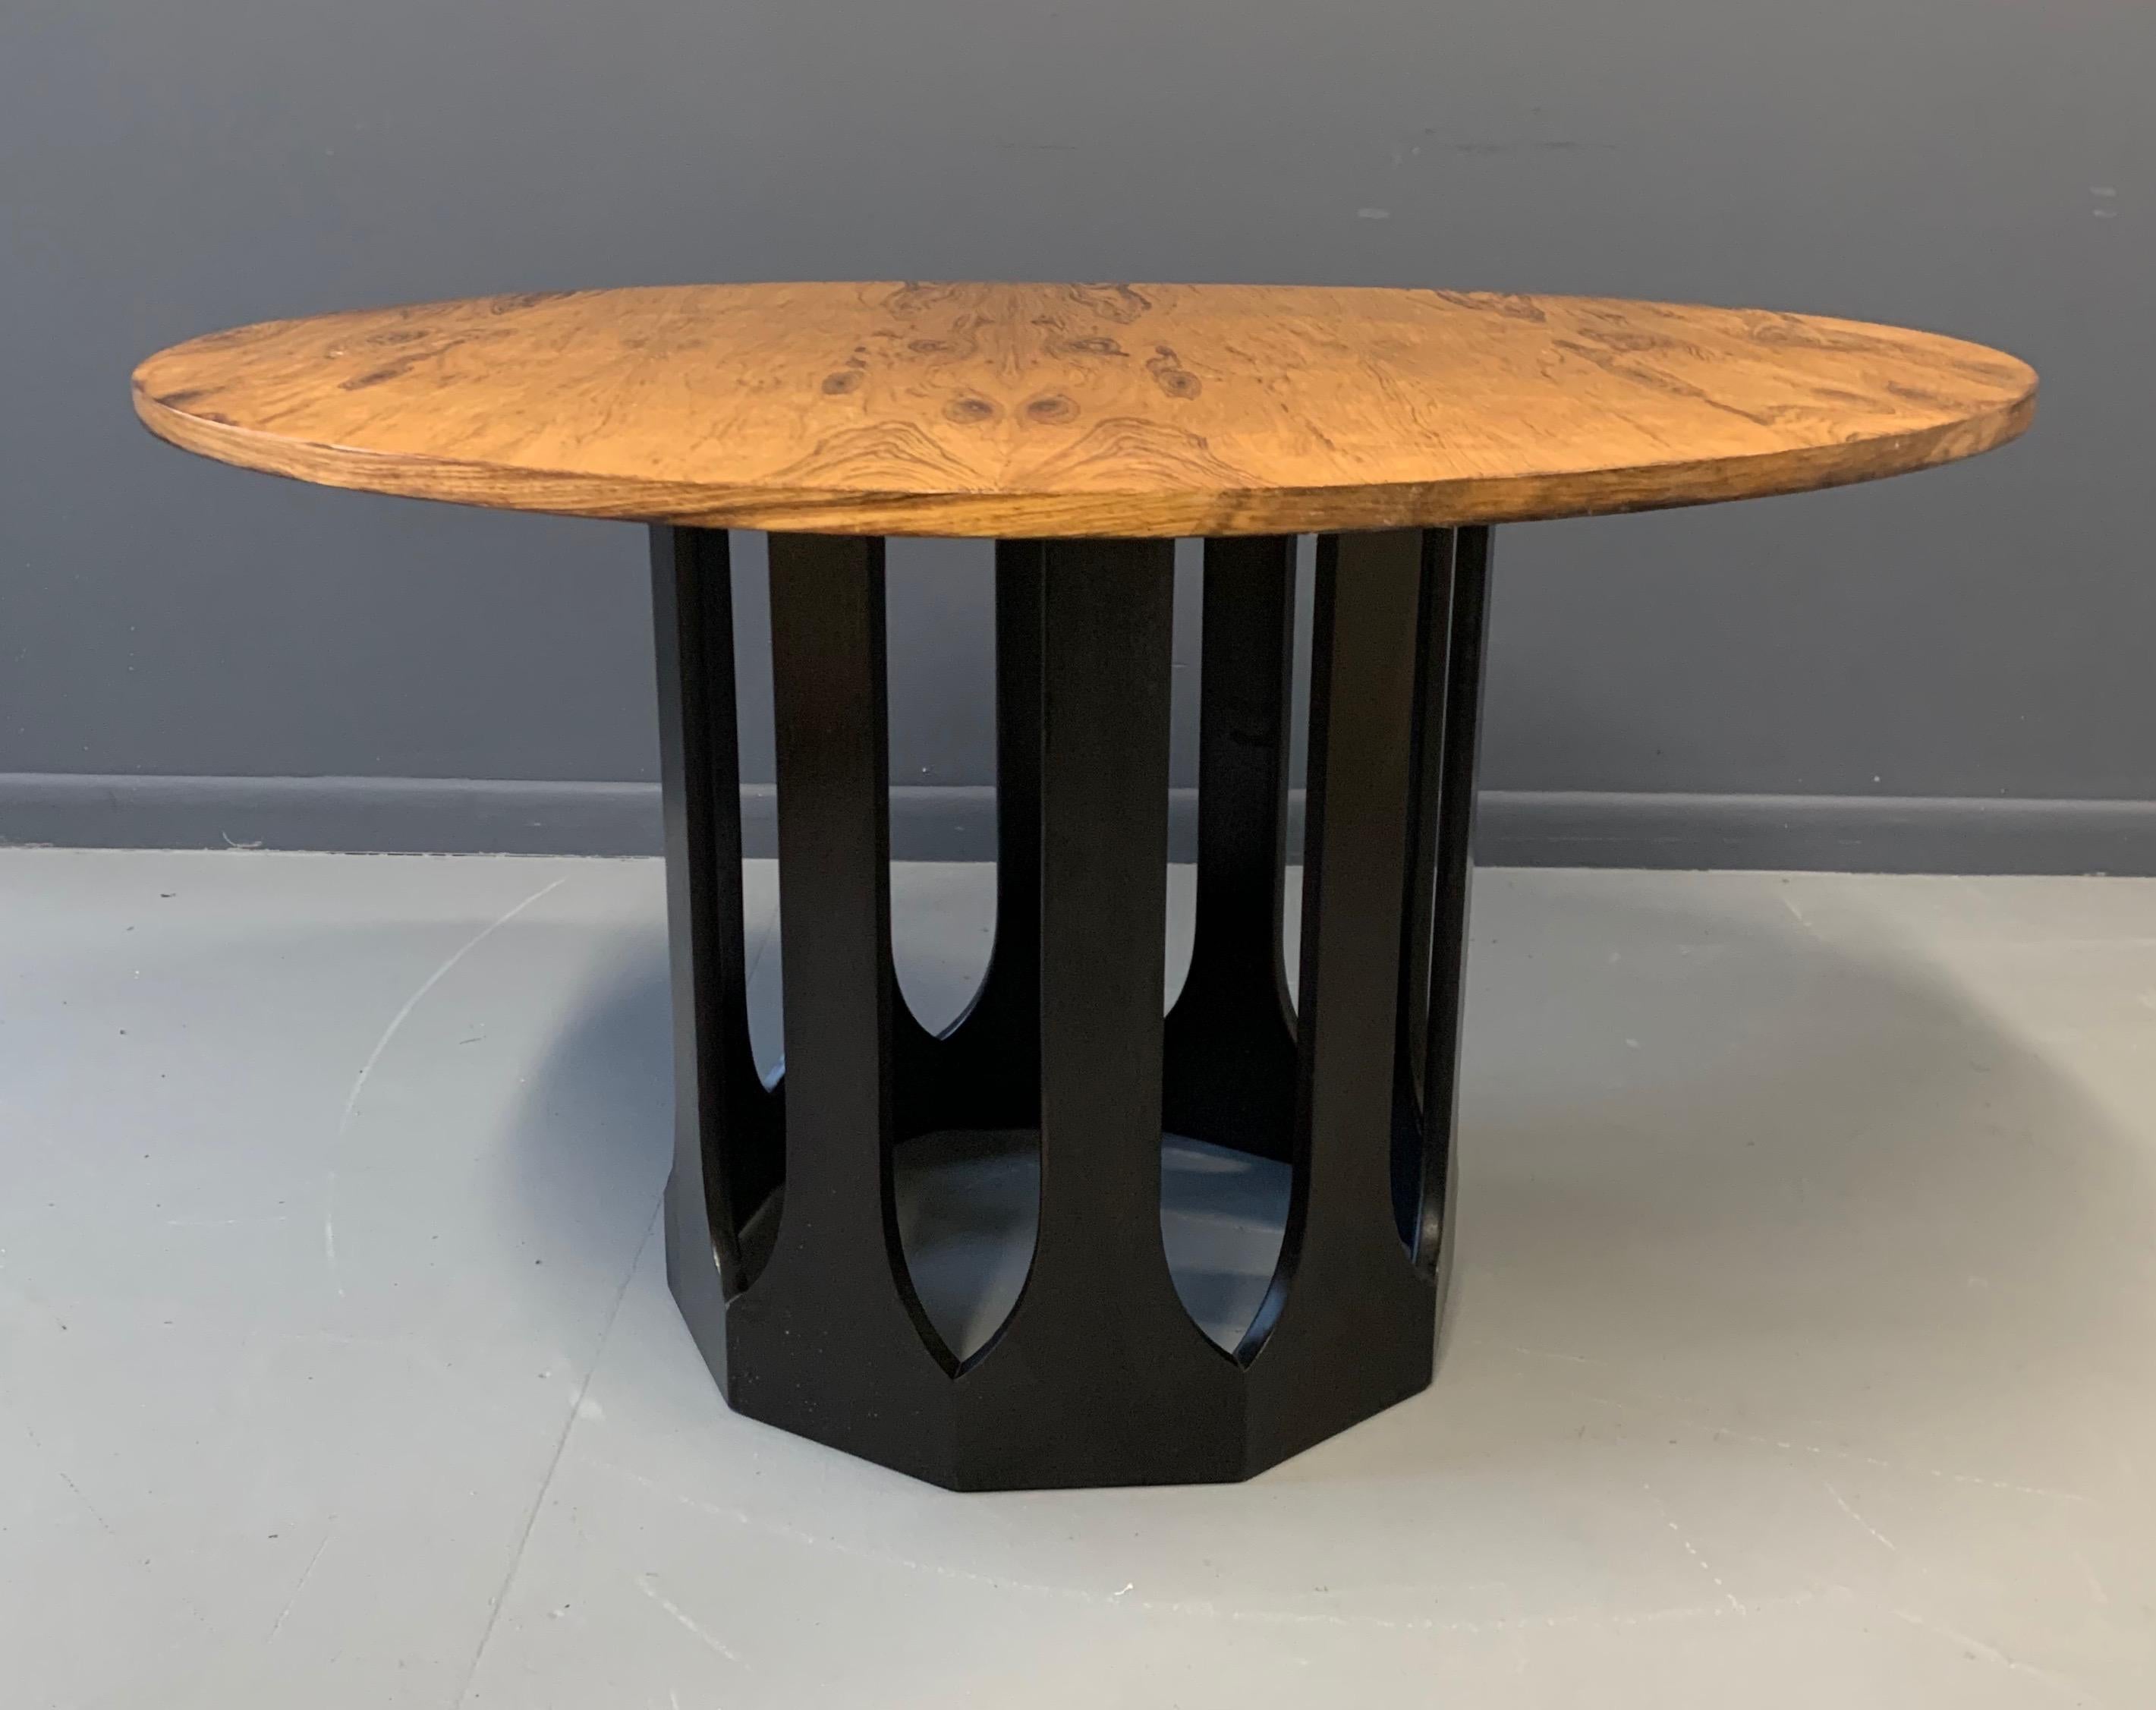 Midcentury Harvey Probber breakfast or game table. This table has an elegant black mahogany cylindrical base with cutout design and a 42